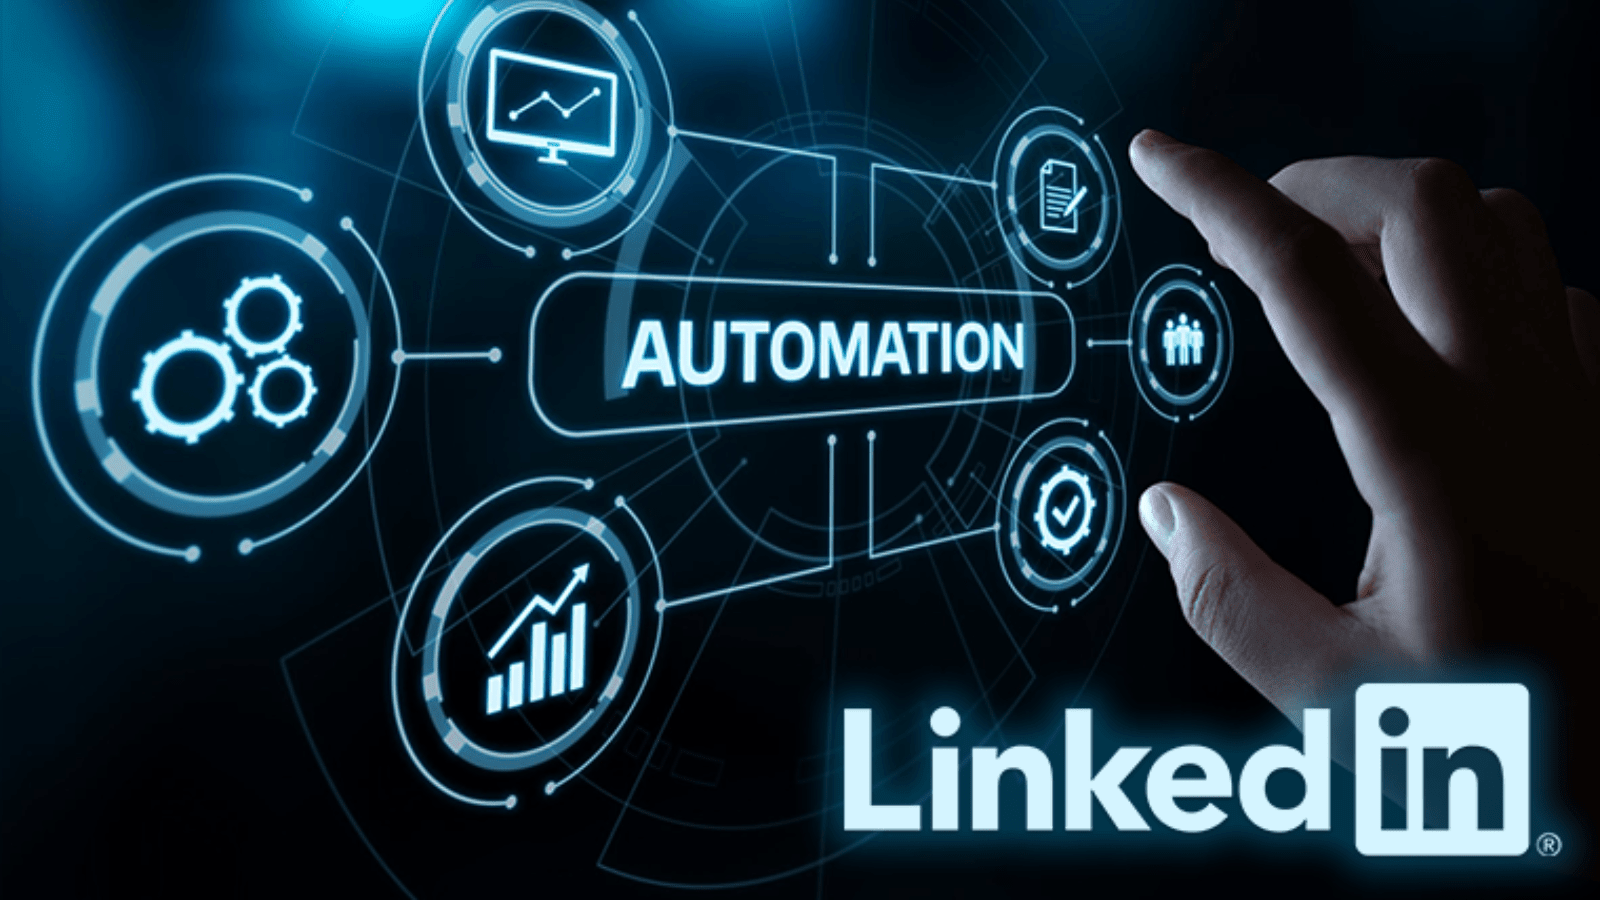 7-reasons-to-use-LinkedIn-automation-tools